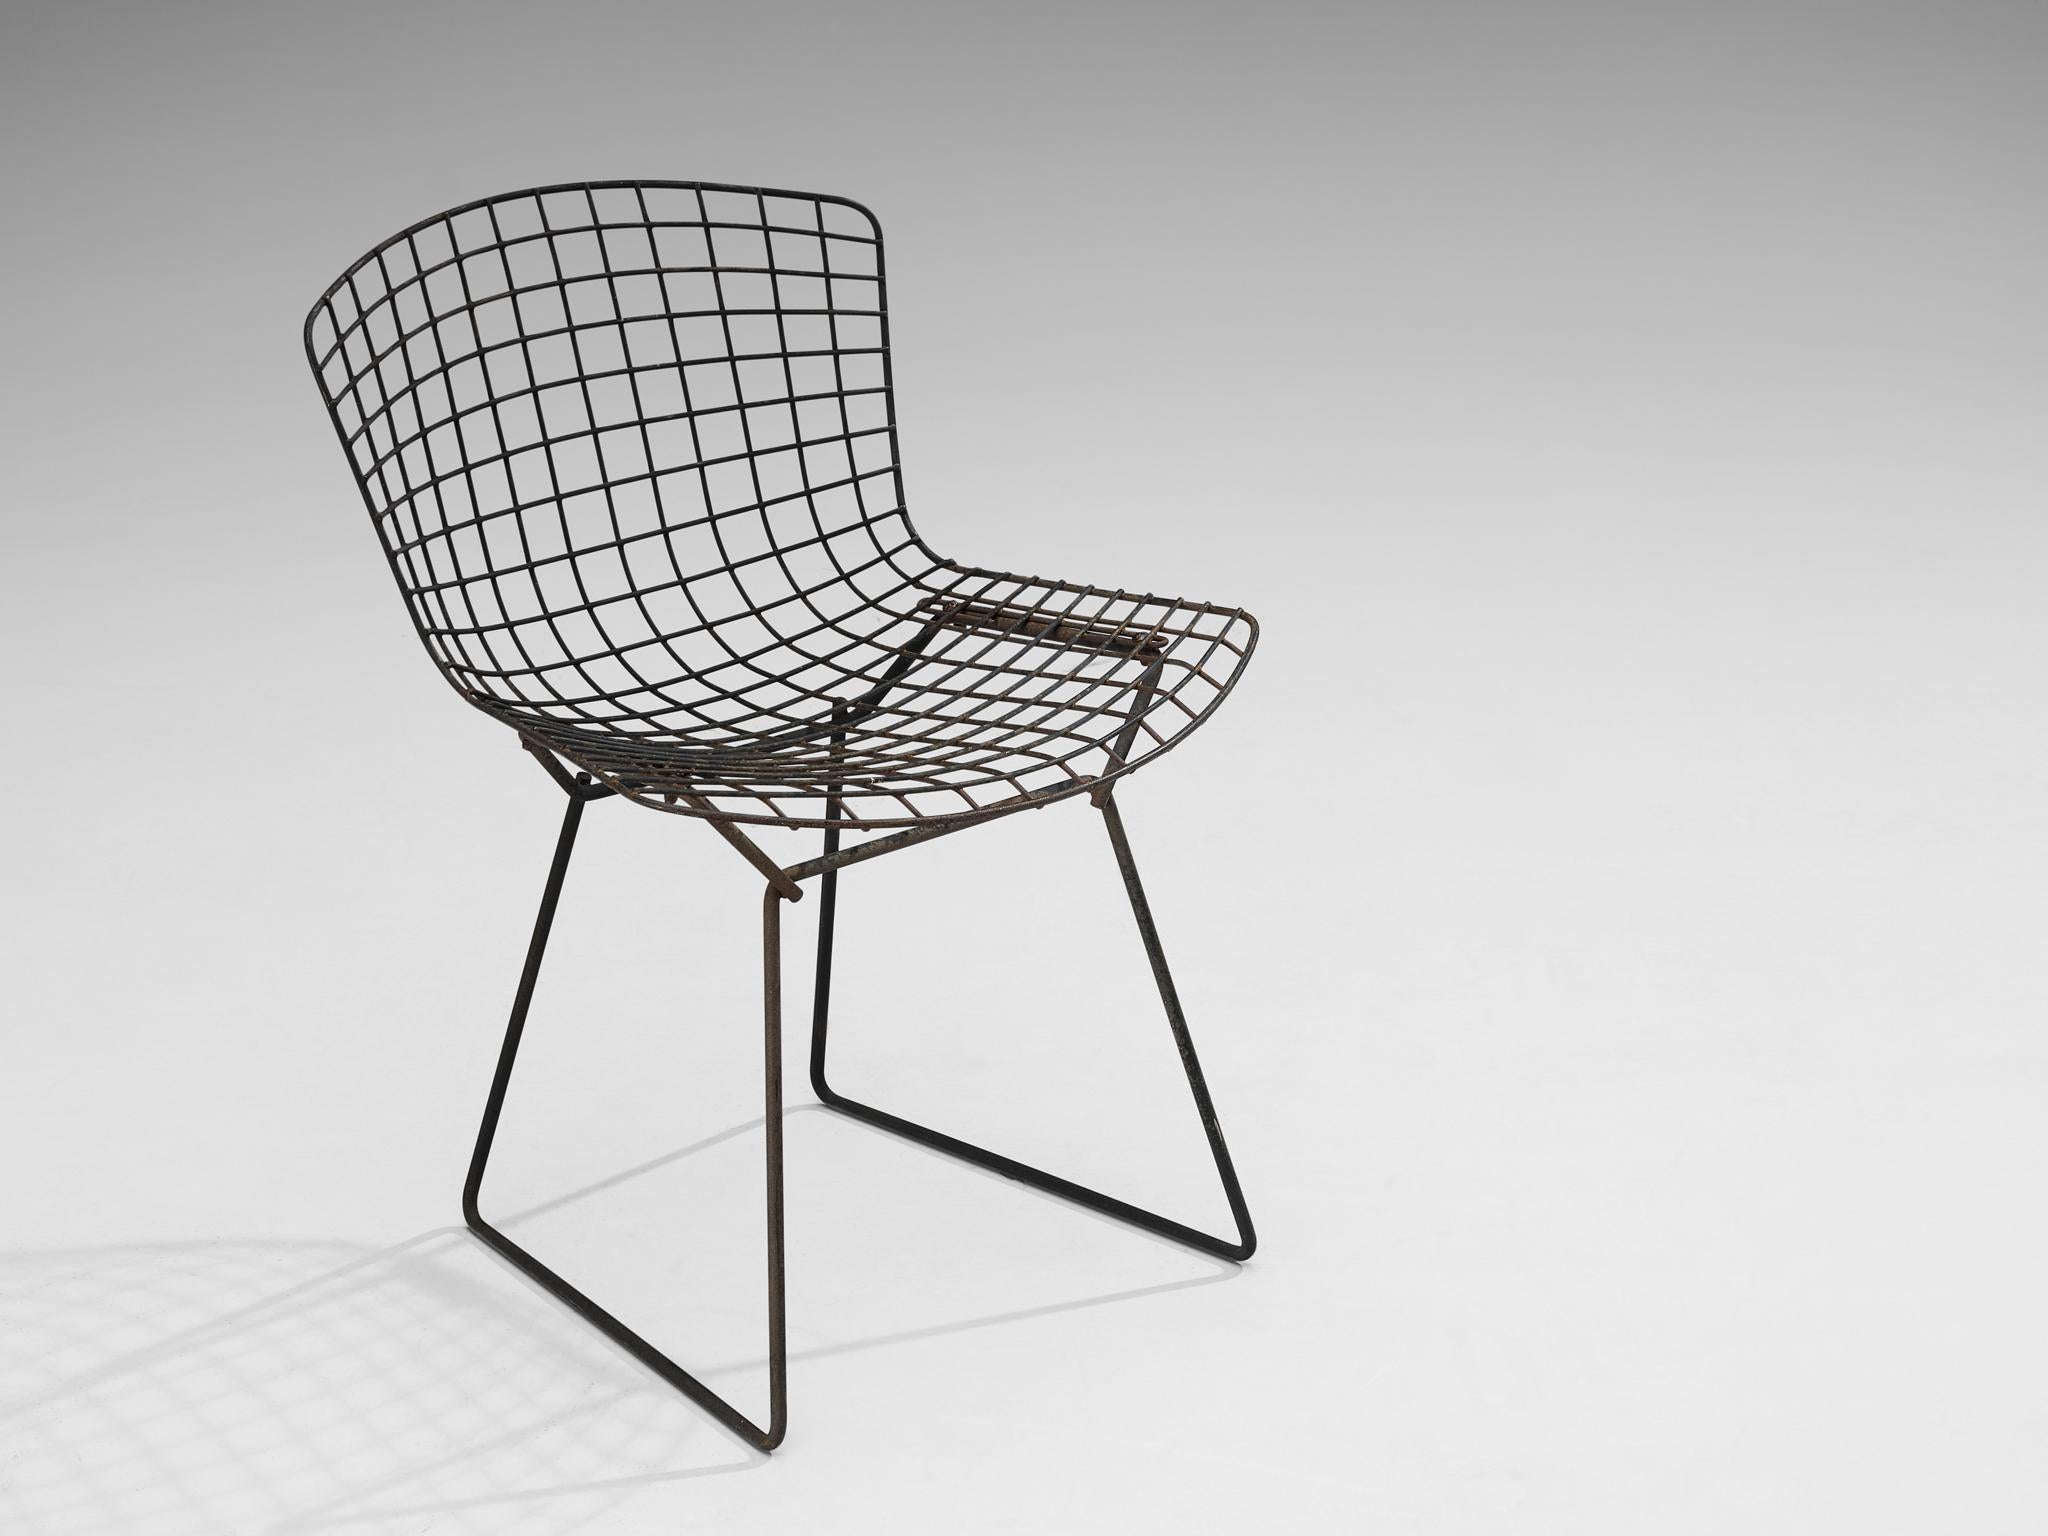 Harry Bertoia for Knoll International, 'side chair', coated steel, United States, design 1952

This 'side' patio chair is designed by Harry Bertoia in 1952. Executed in black coated steel, this chair features an intricate interlacing of steel